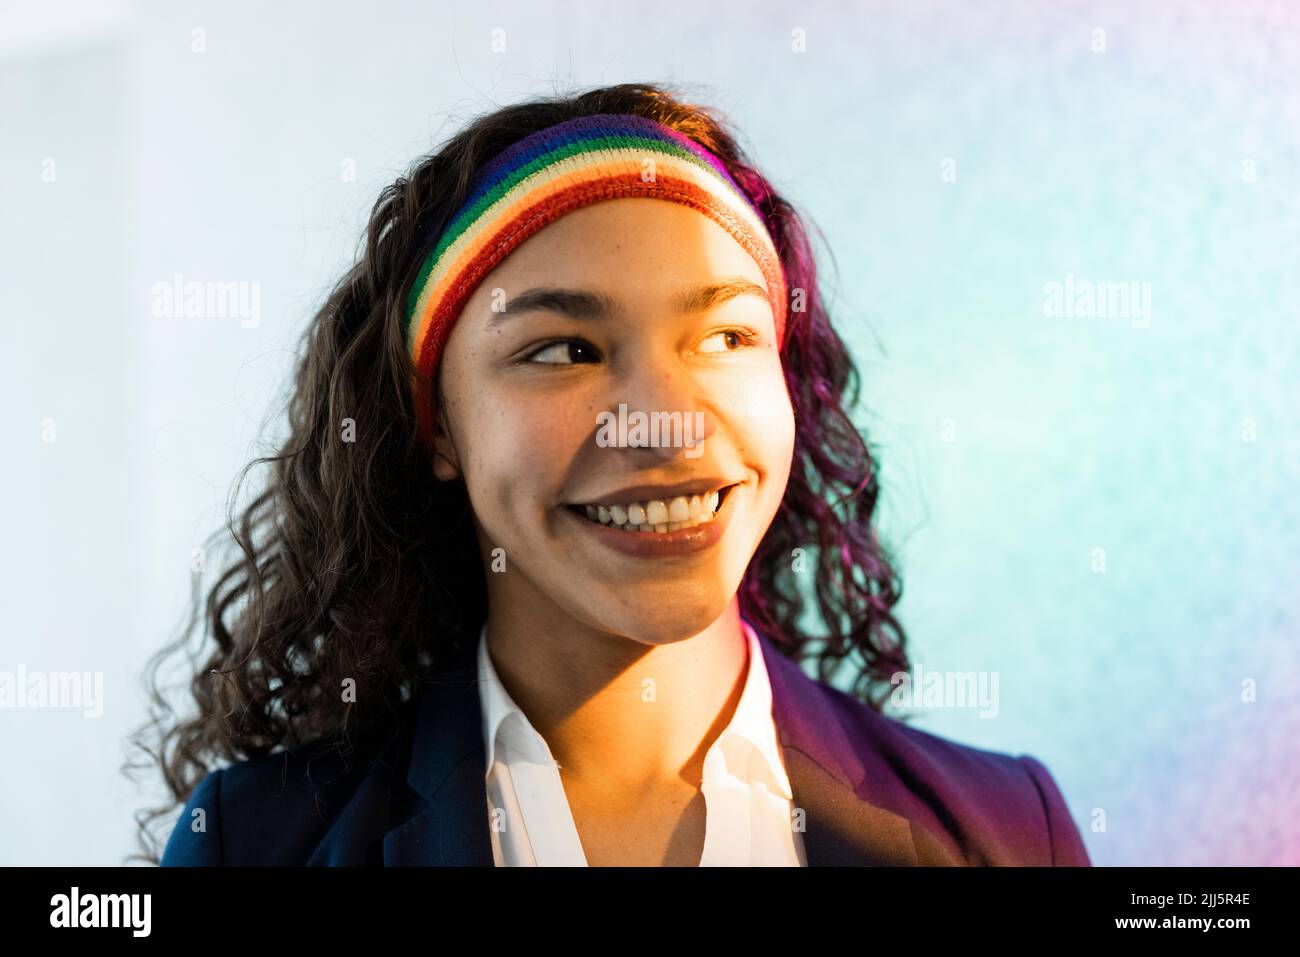 Happy young businesswoman with curly hair wearing multi colored headband Stock Photo